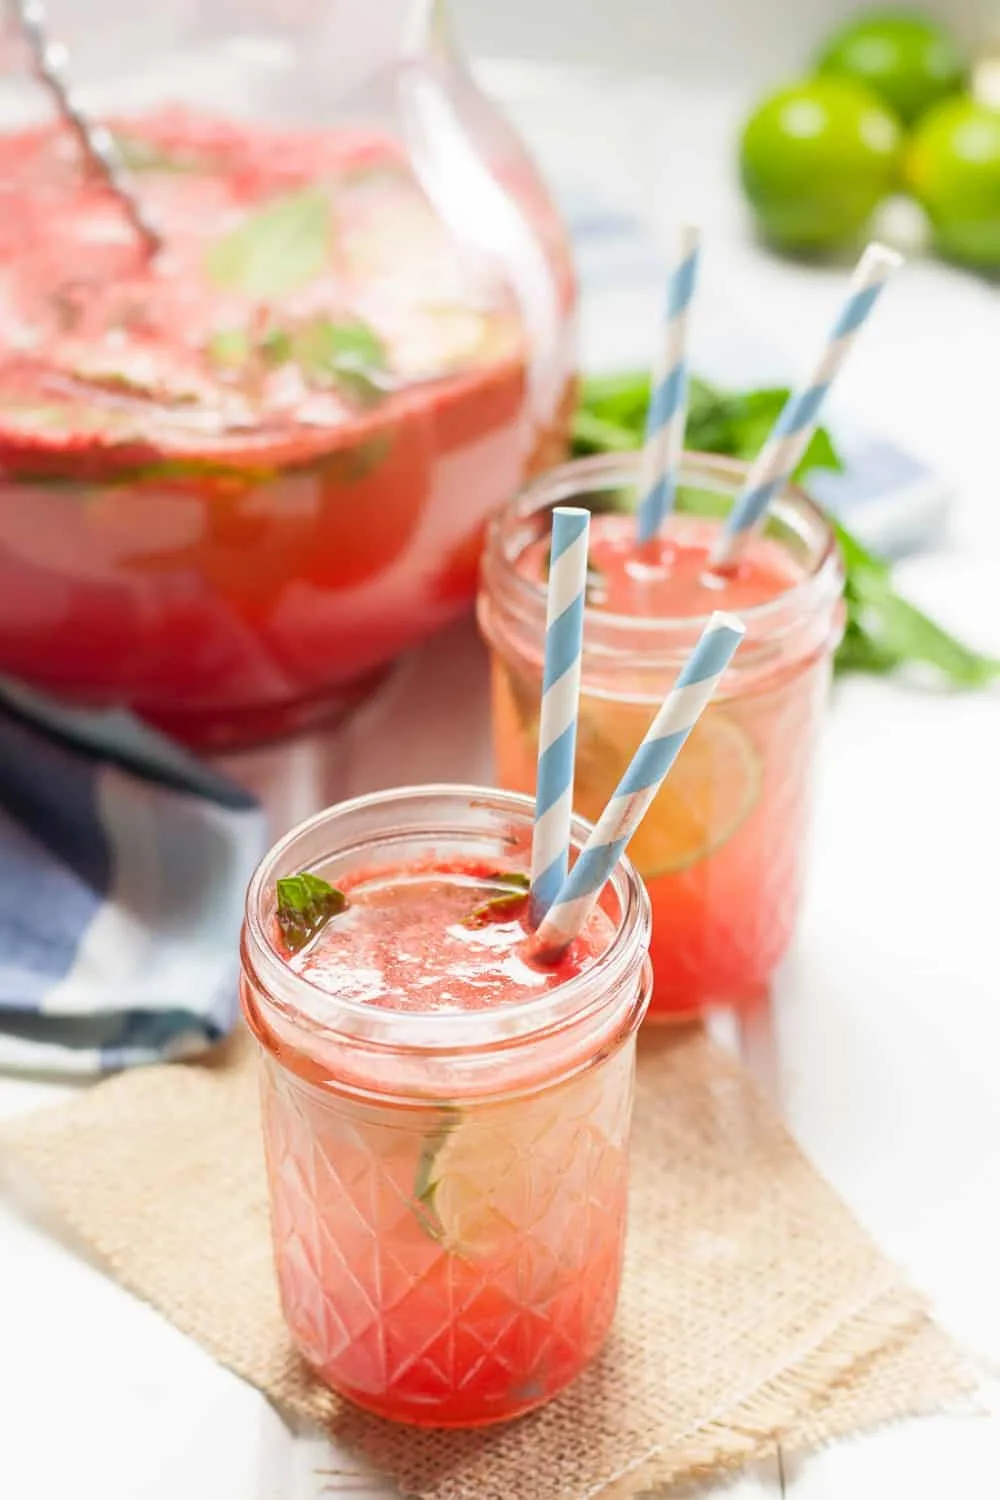 Watermelon mint sangria is a refreshing summer cocktail! This sangria recipe is made for warm evenings on the porch. * GoodieGodmother.com